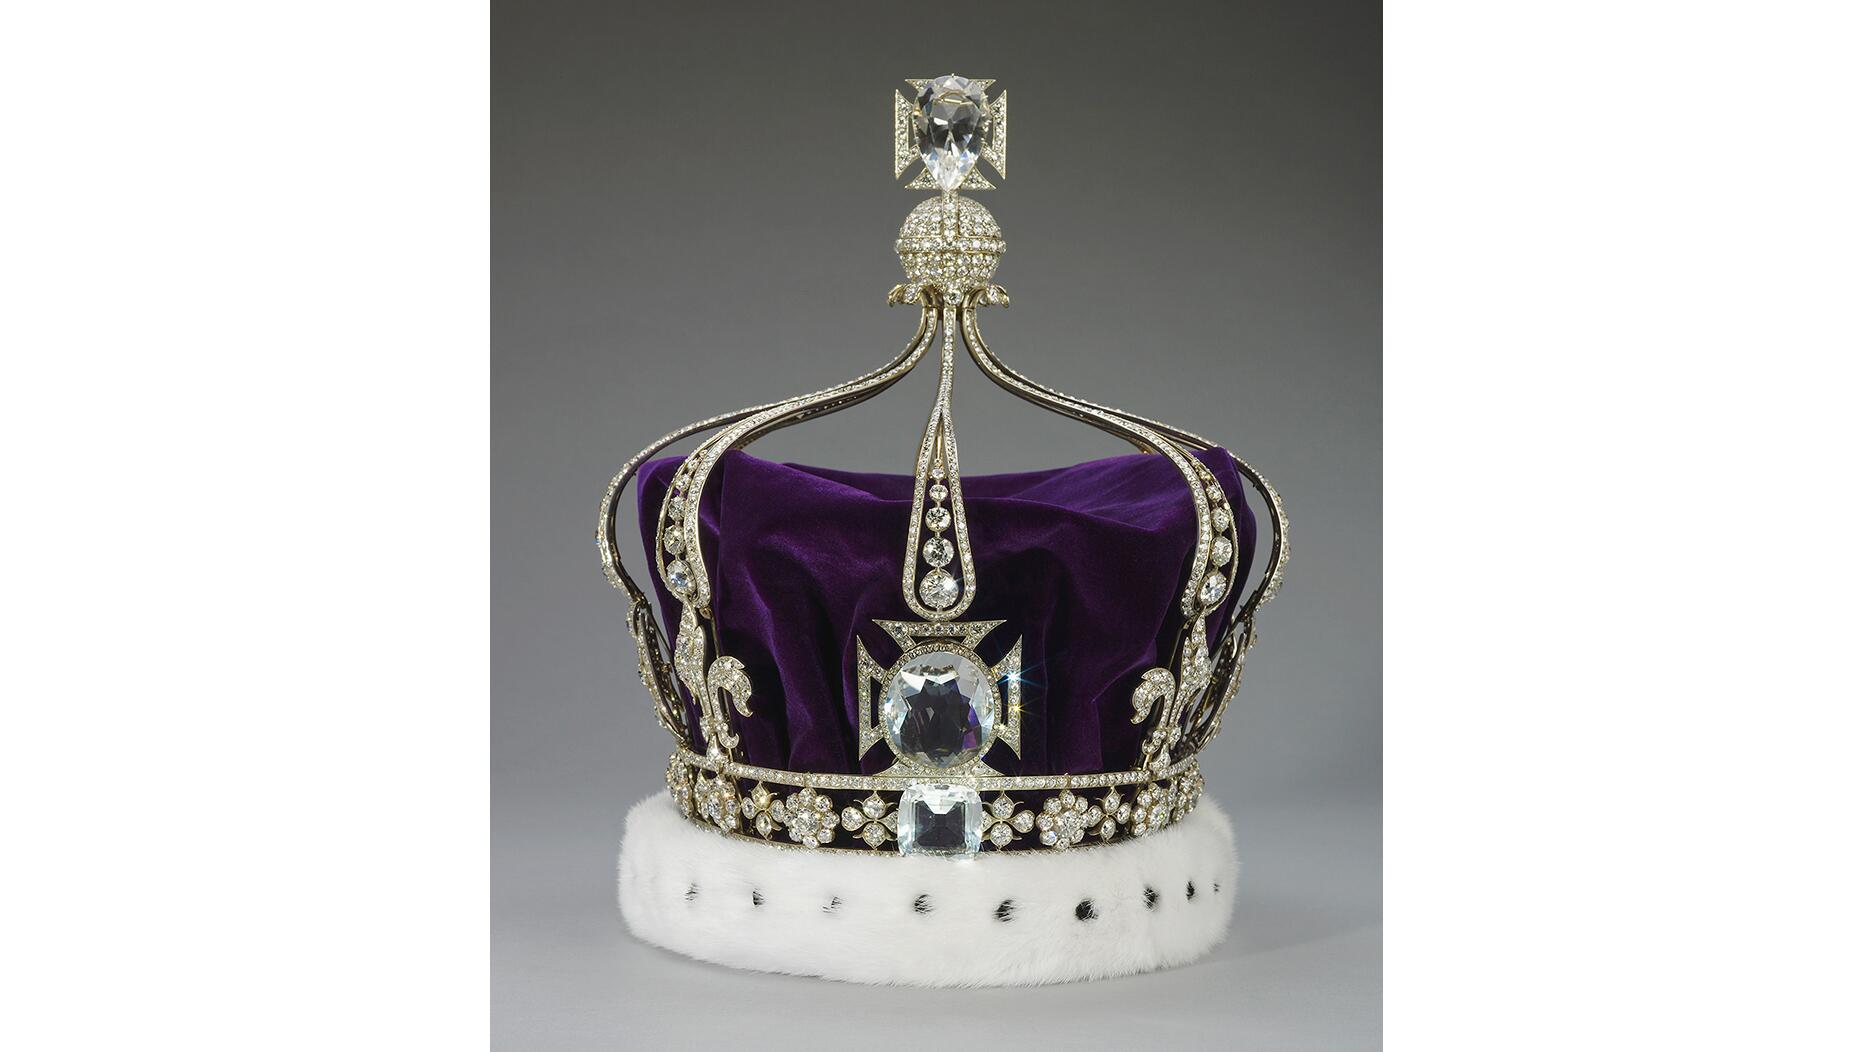 20230221_Queen Mary's Crown.jpg